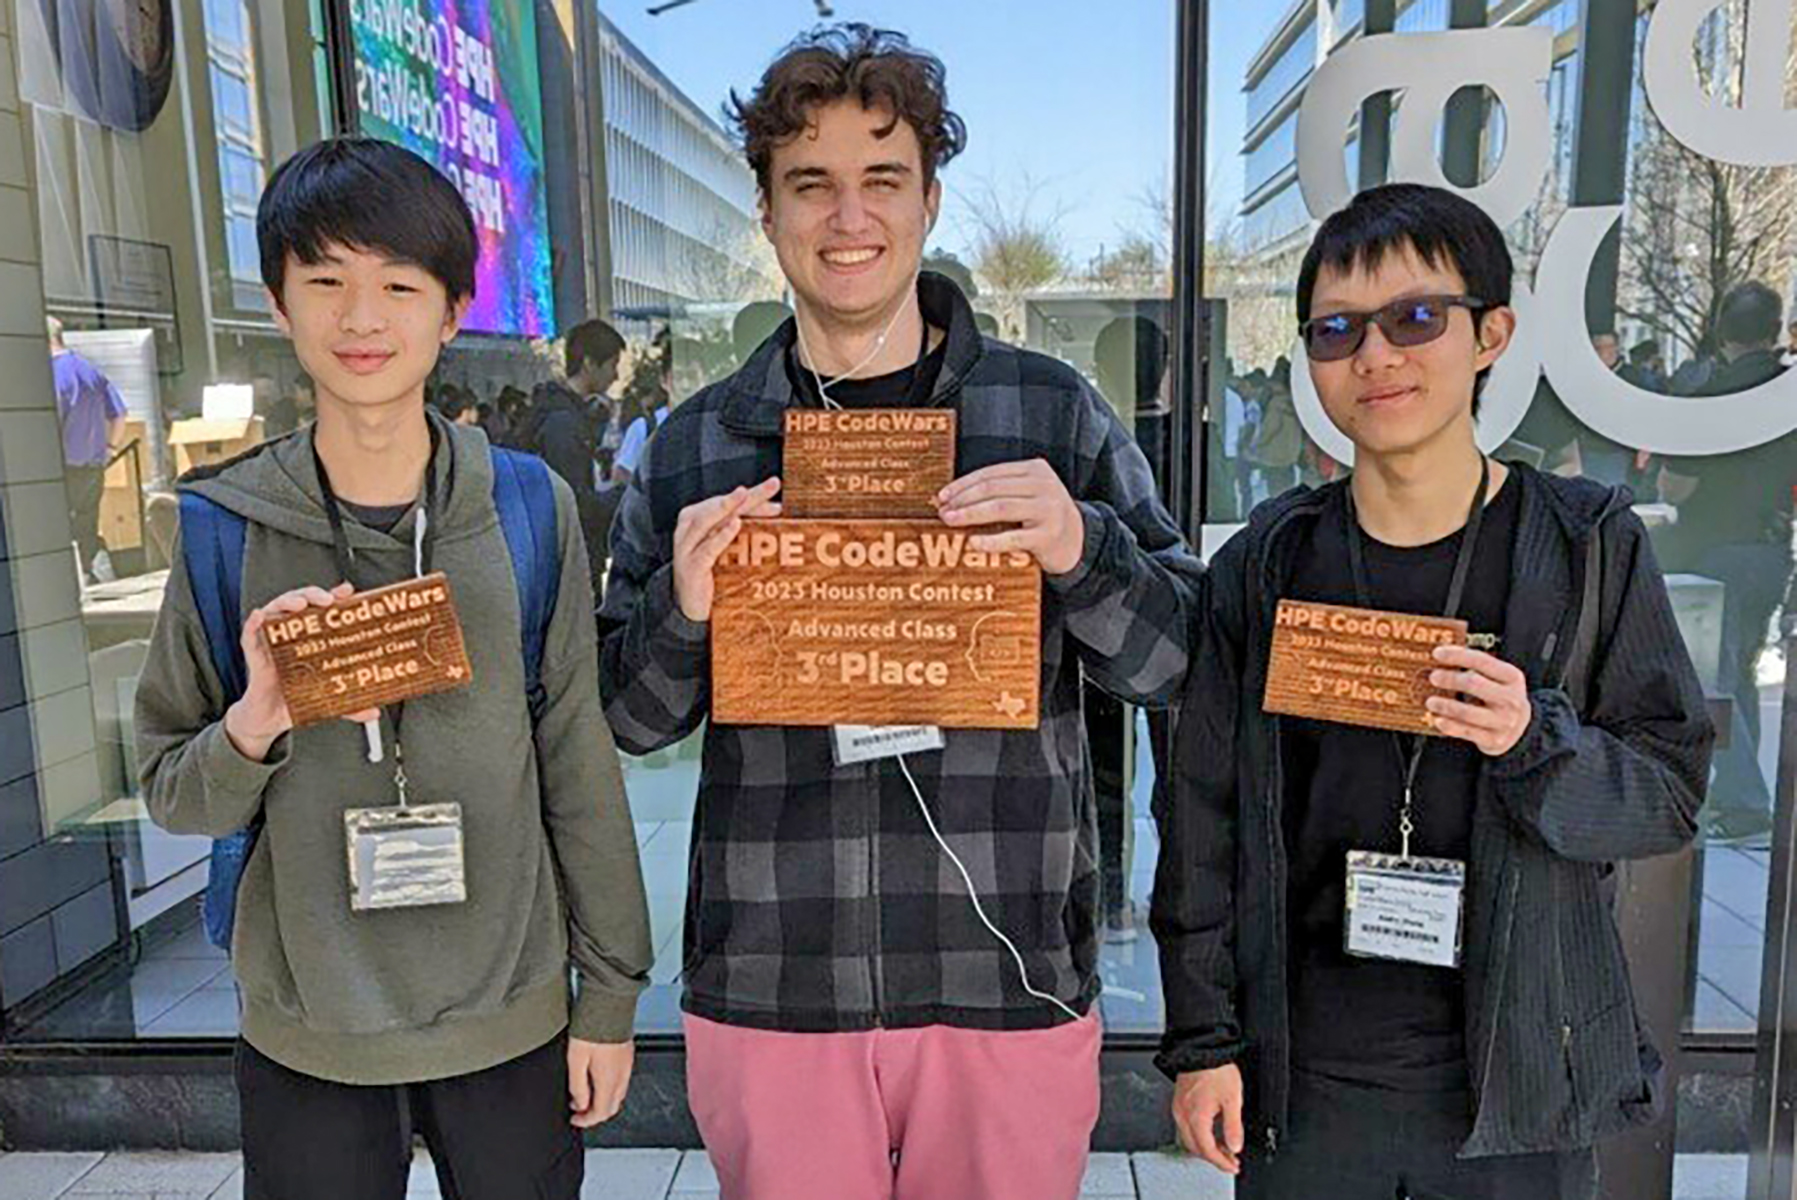 Cypress Woods HS Students Place Third in HP CodeWars Contest